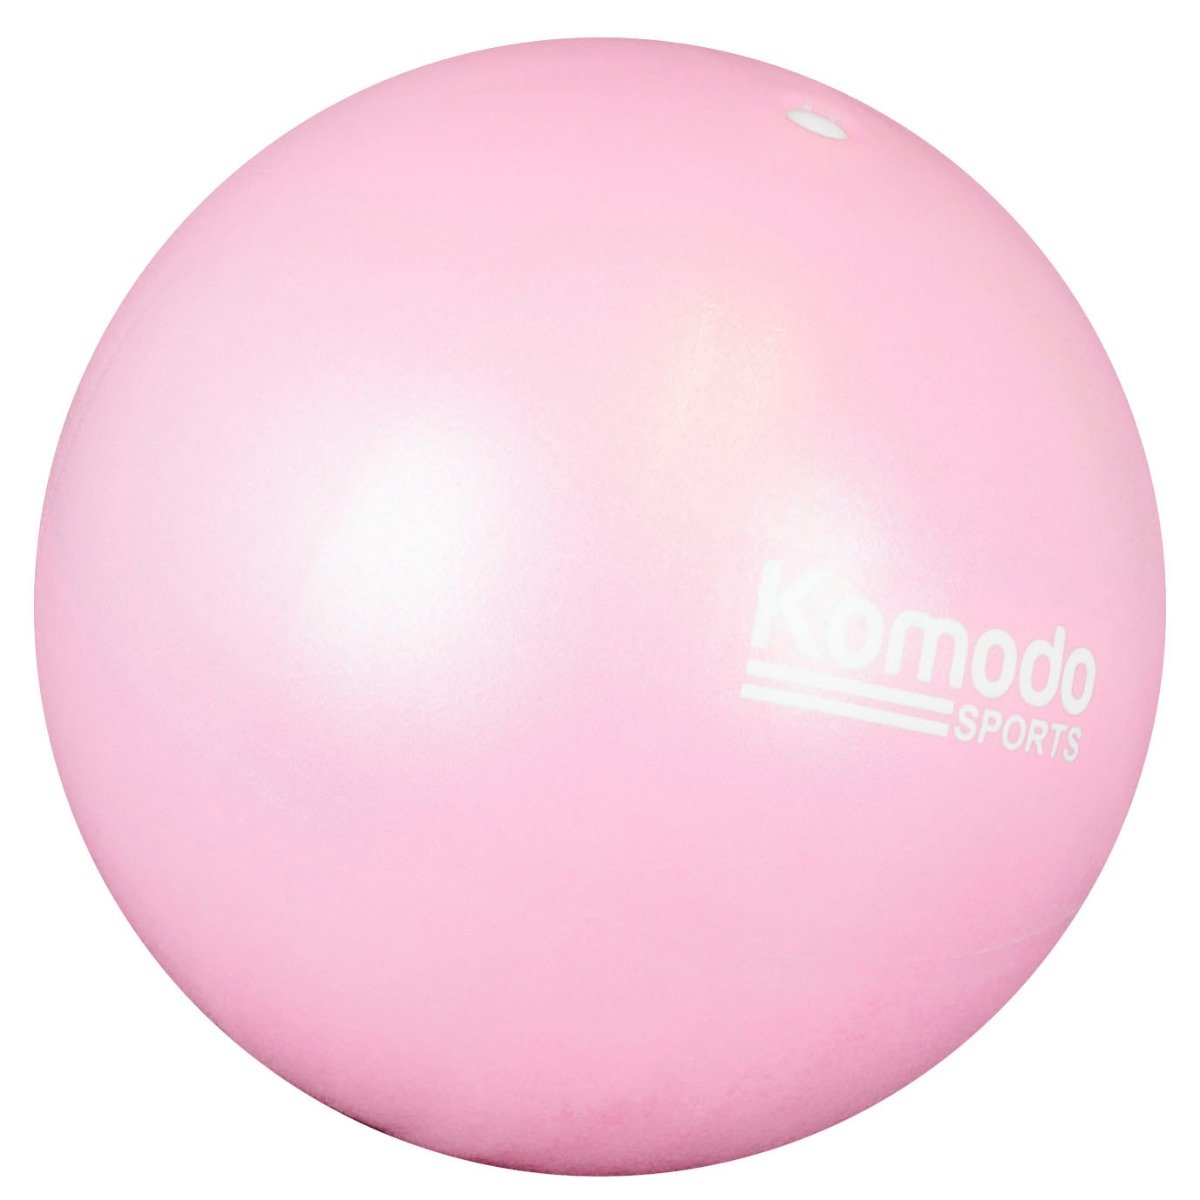 25cm Exercise Ball - Pink - Inspirely